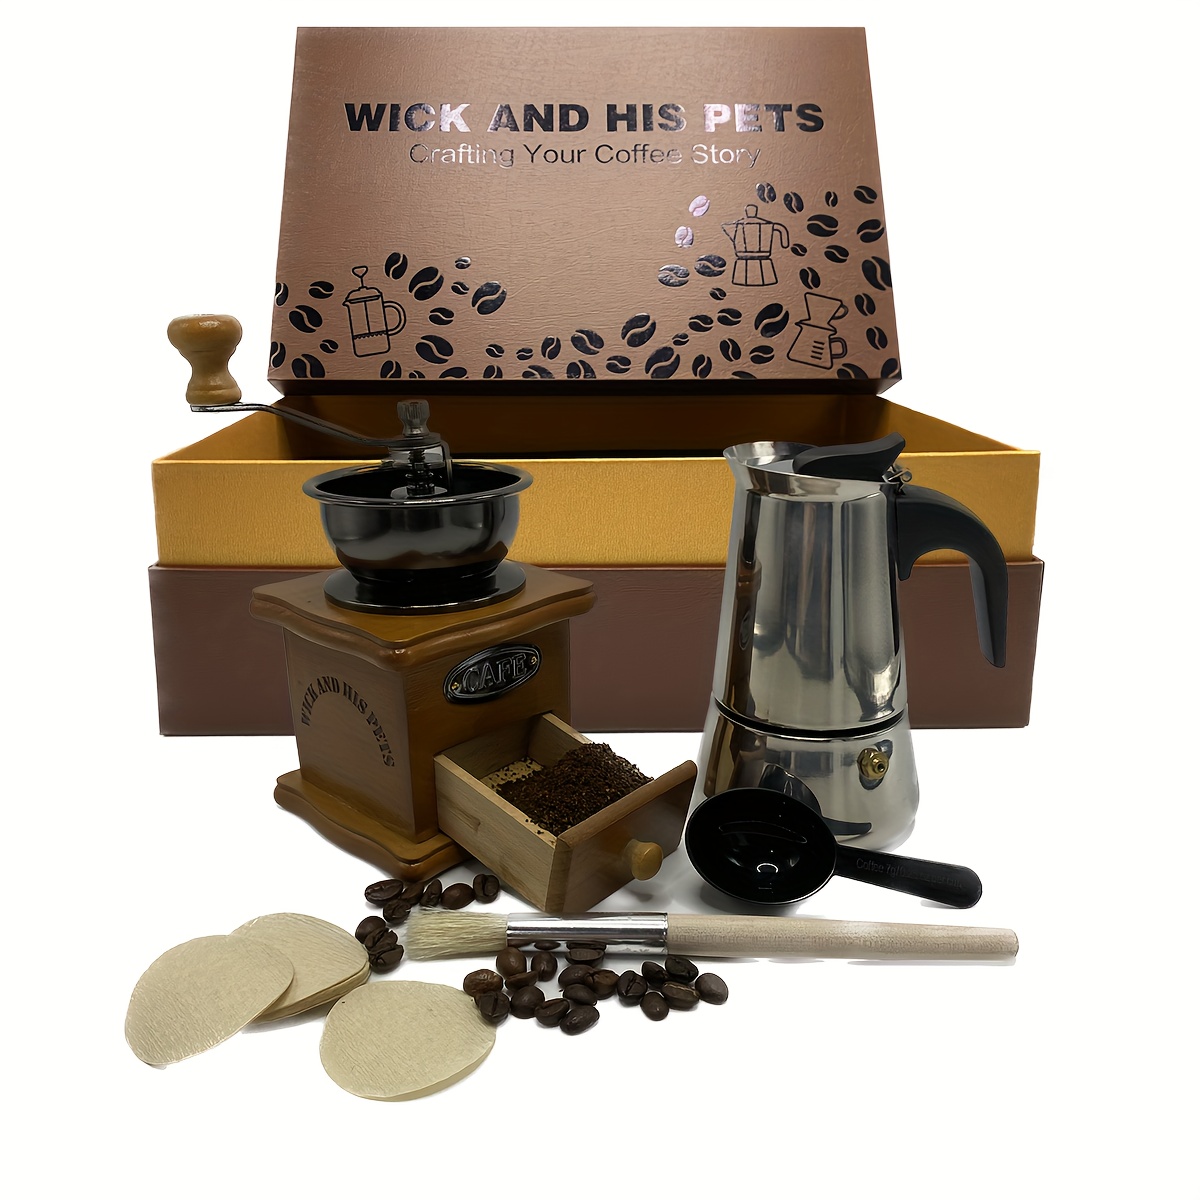 Promote The Art Of Coffee, Stovetop Espresso Vintage Wooden Manual